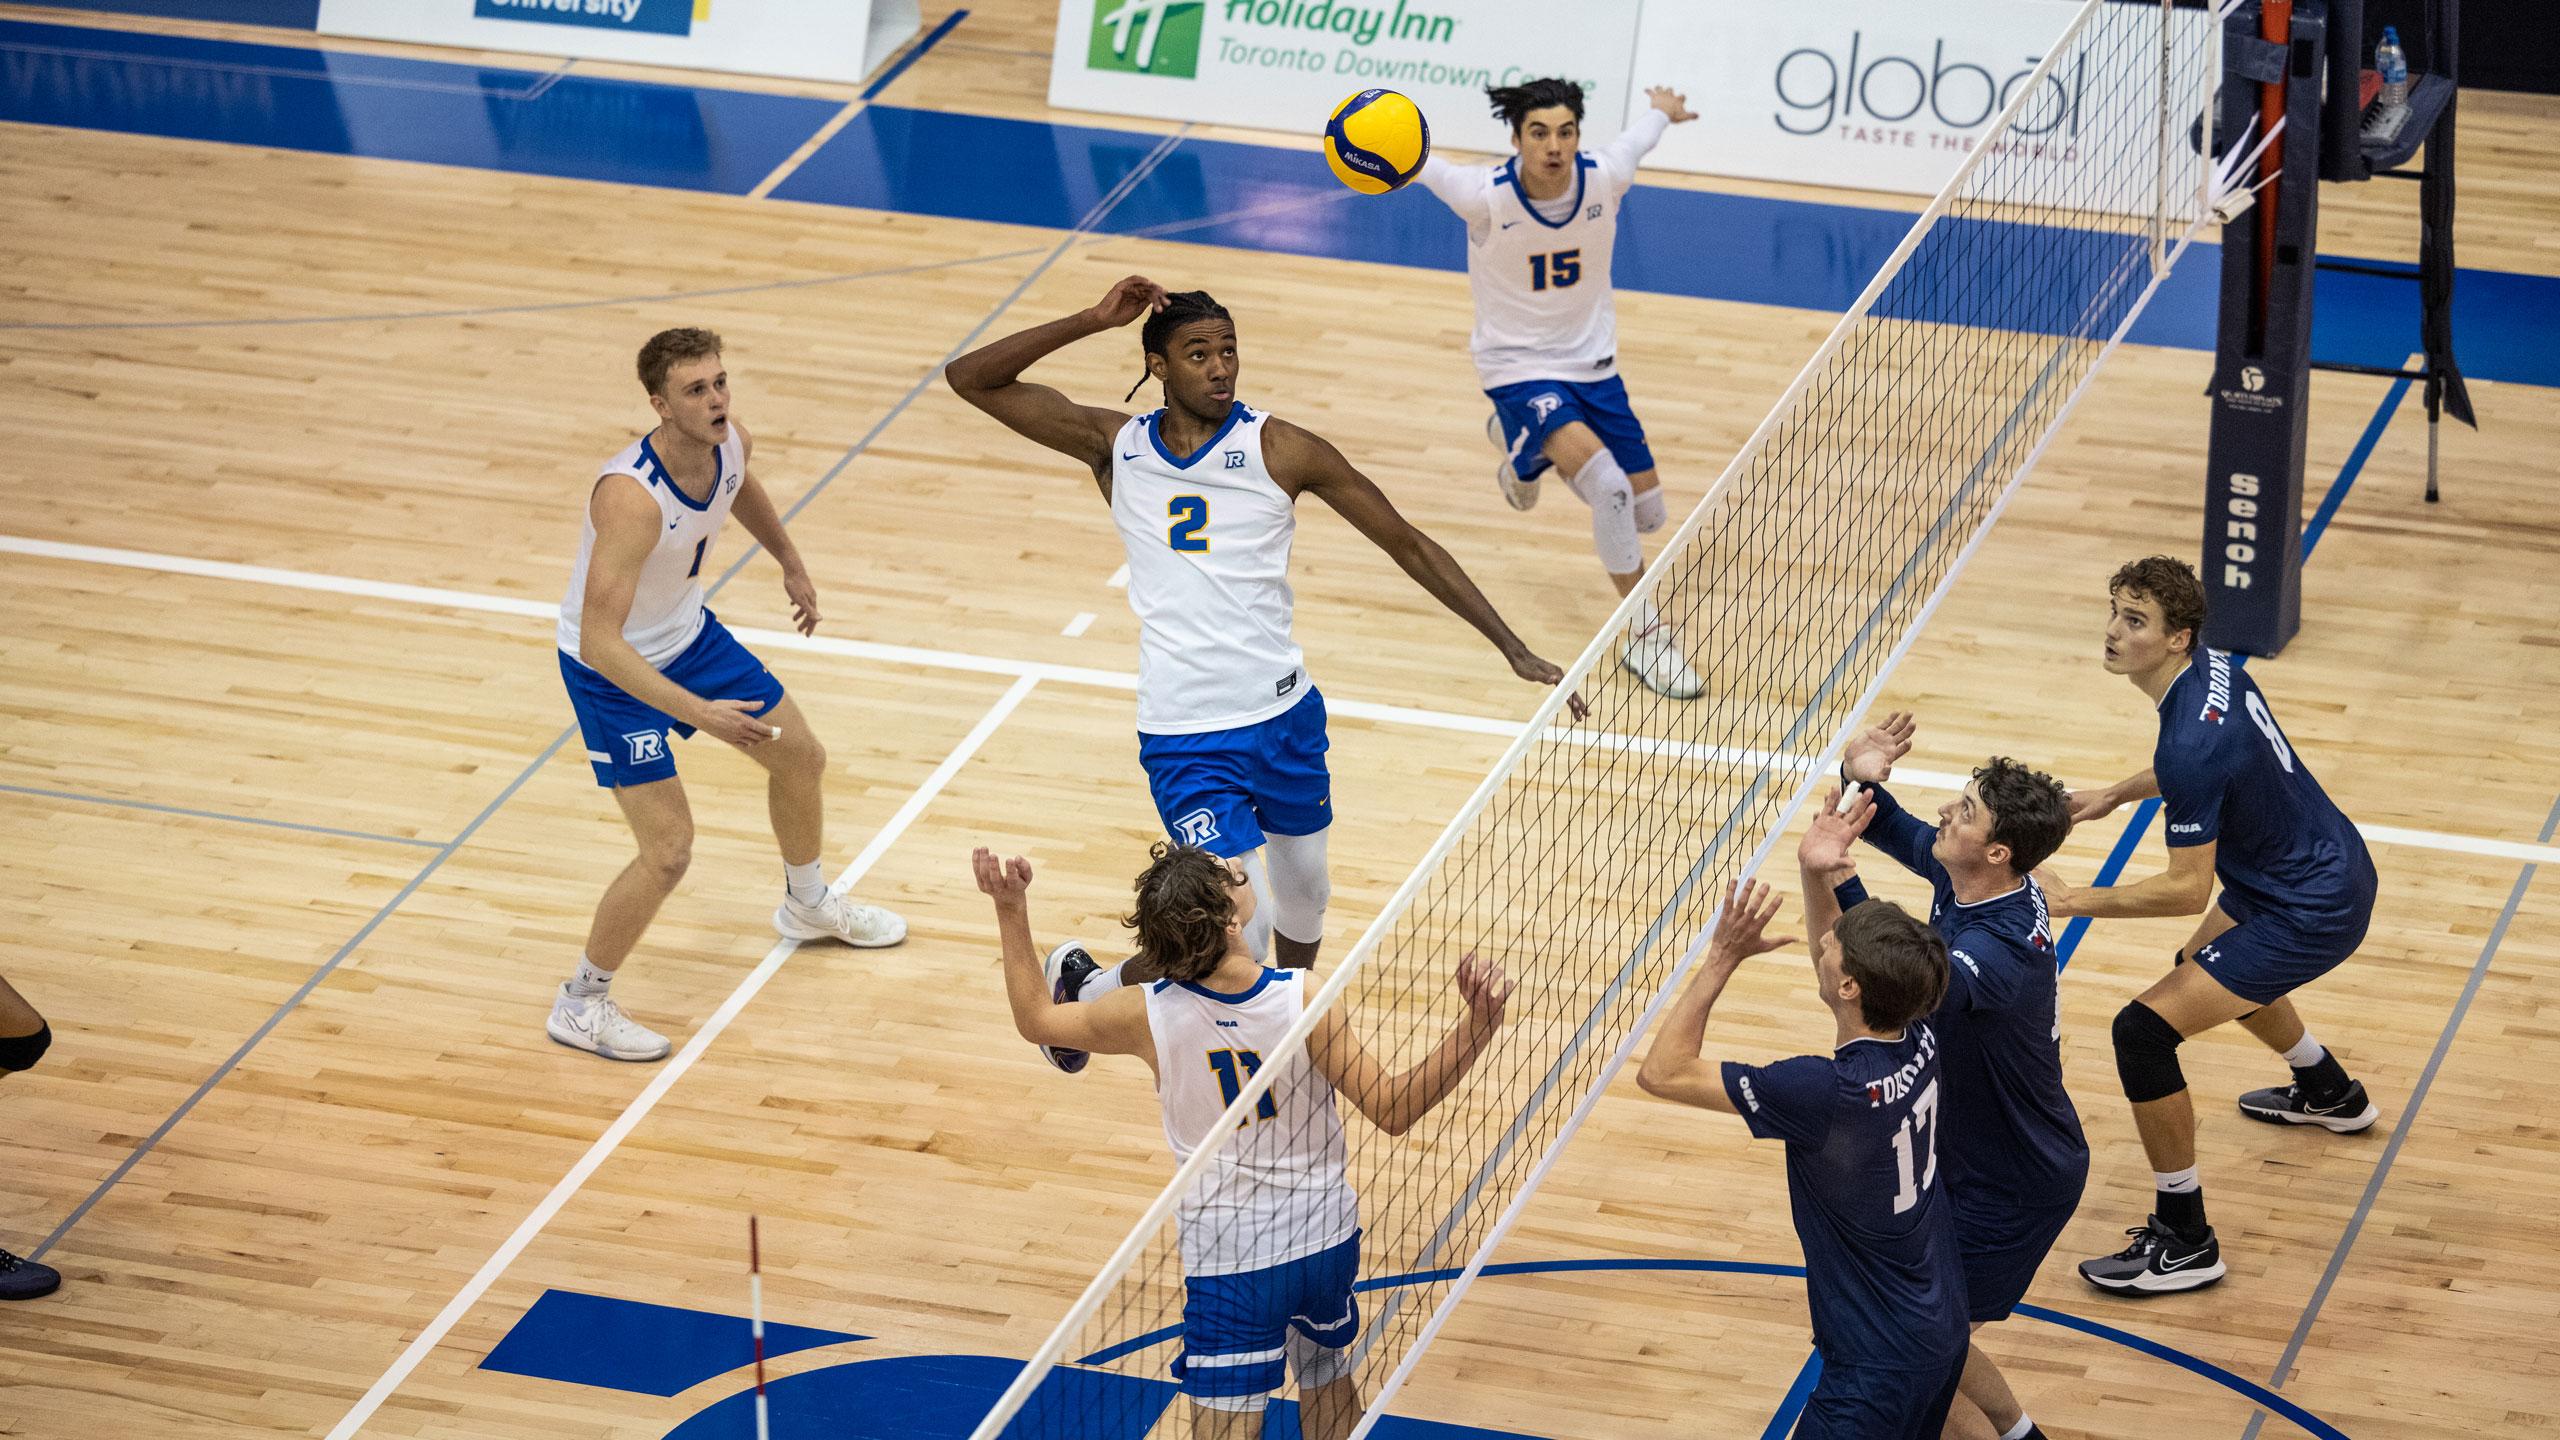 Four TMU men's volleyball players in white jerseys spike a ball over the net with three U of T players with dark blue jerseys on the other side